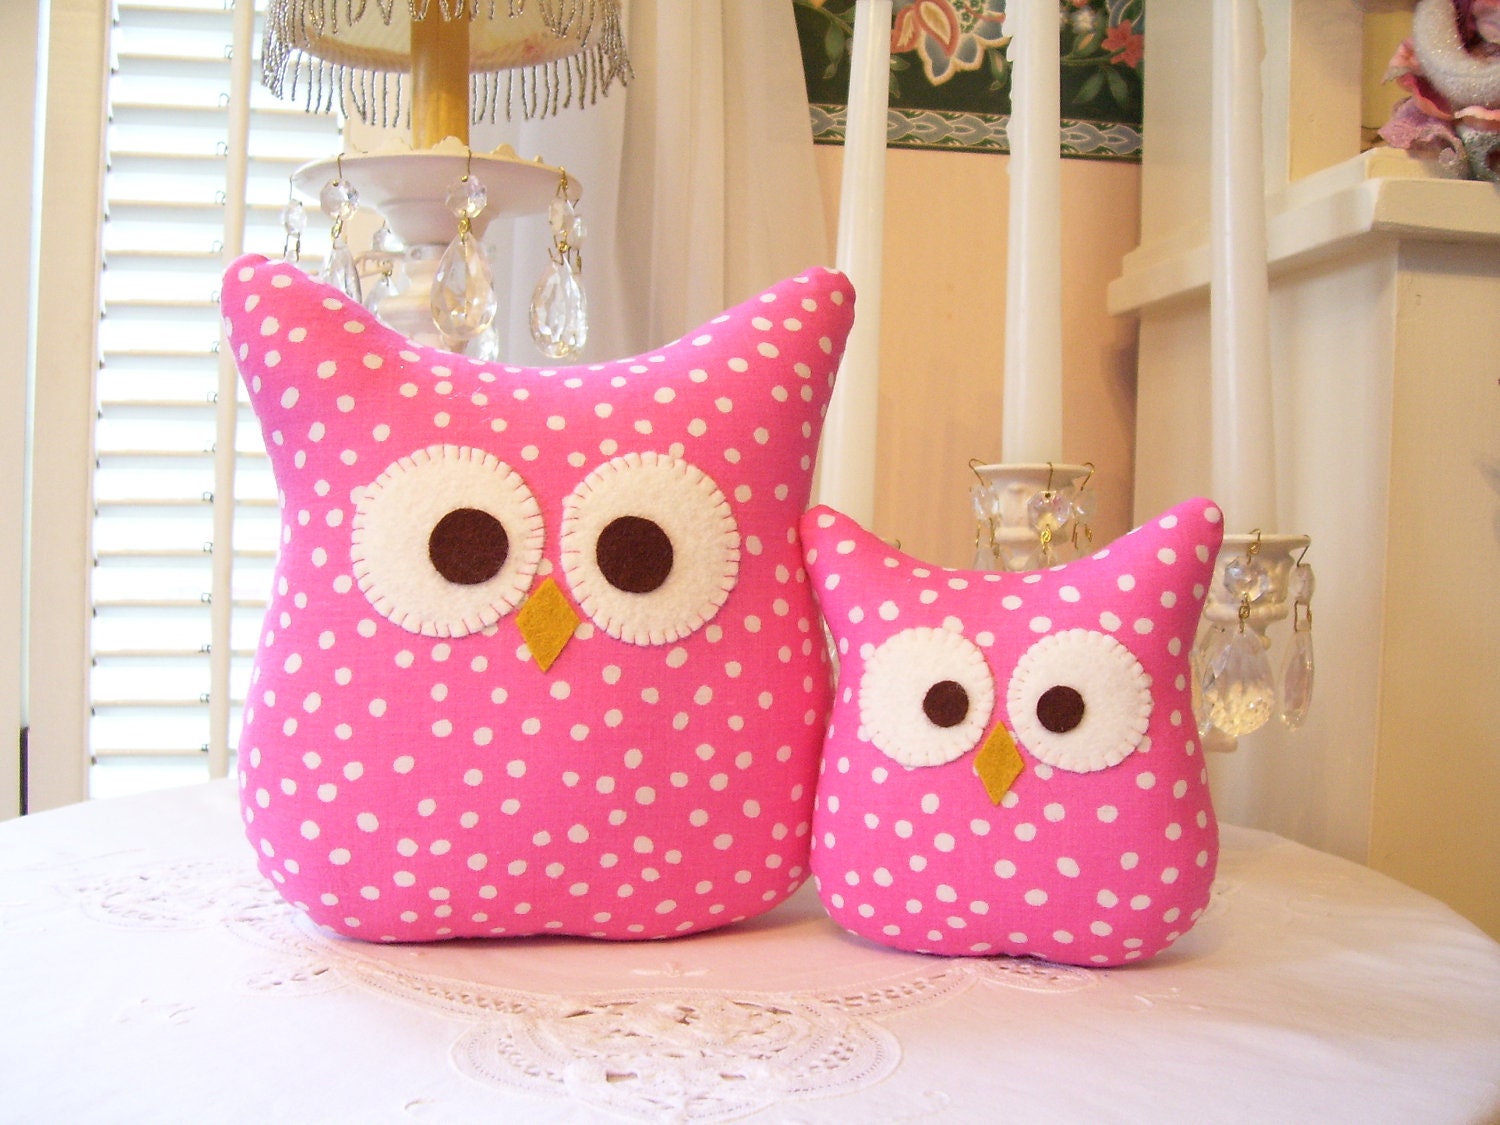 Owls....Mommy and Baby Owl Set...Pink Dots - rosecottageboutique2